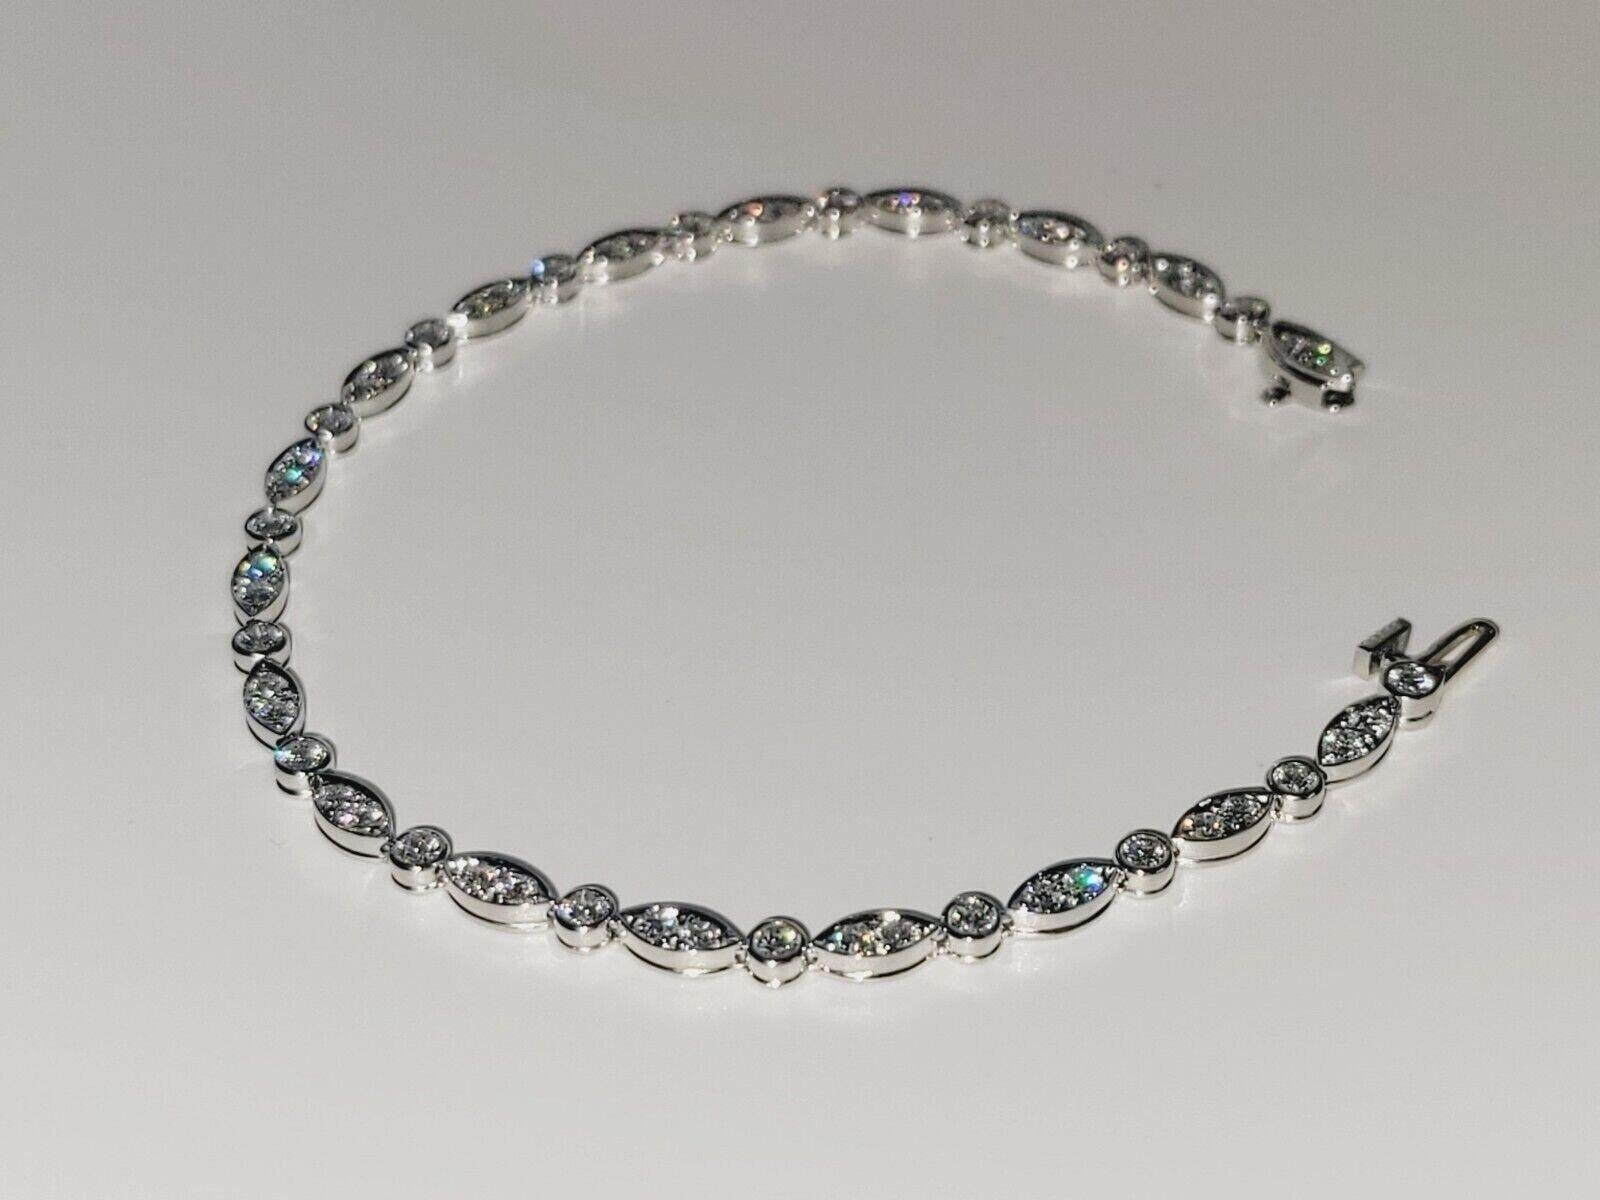 Excellent condition.
Tiffany Co Jazz Diamond Platinum Bracelet.
1.60 Ct in total 
Length: 7 inch
Width: 3 mm
Weight: 11 gram
White Round Brilliant Diamonds 
Color: F 
Comes with original Tiffany Box